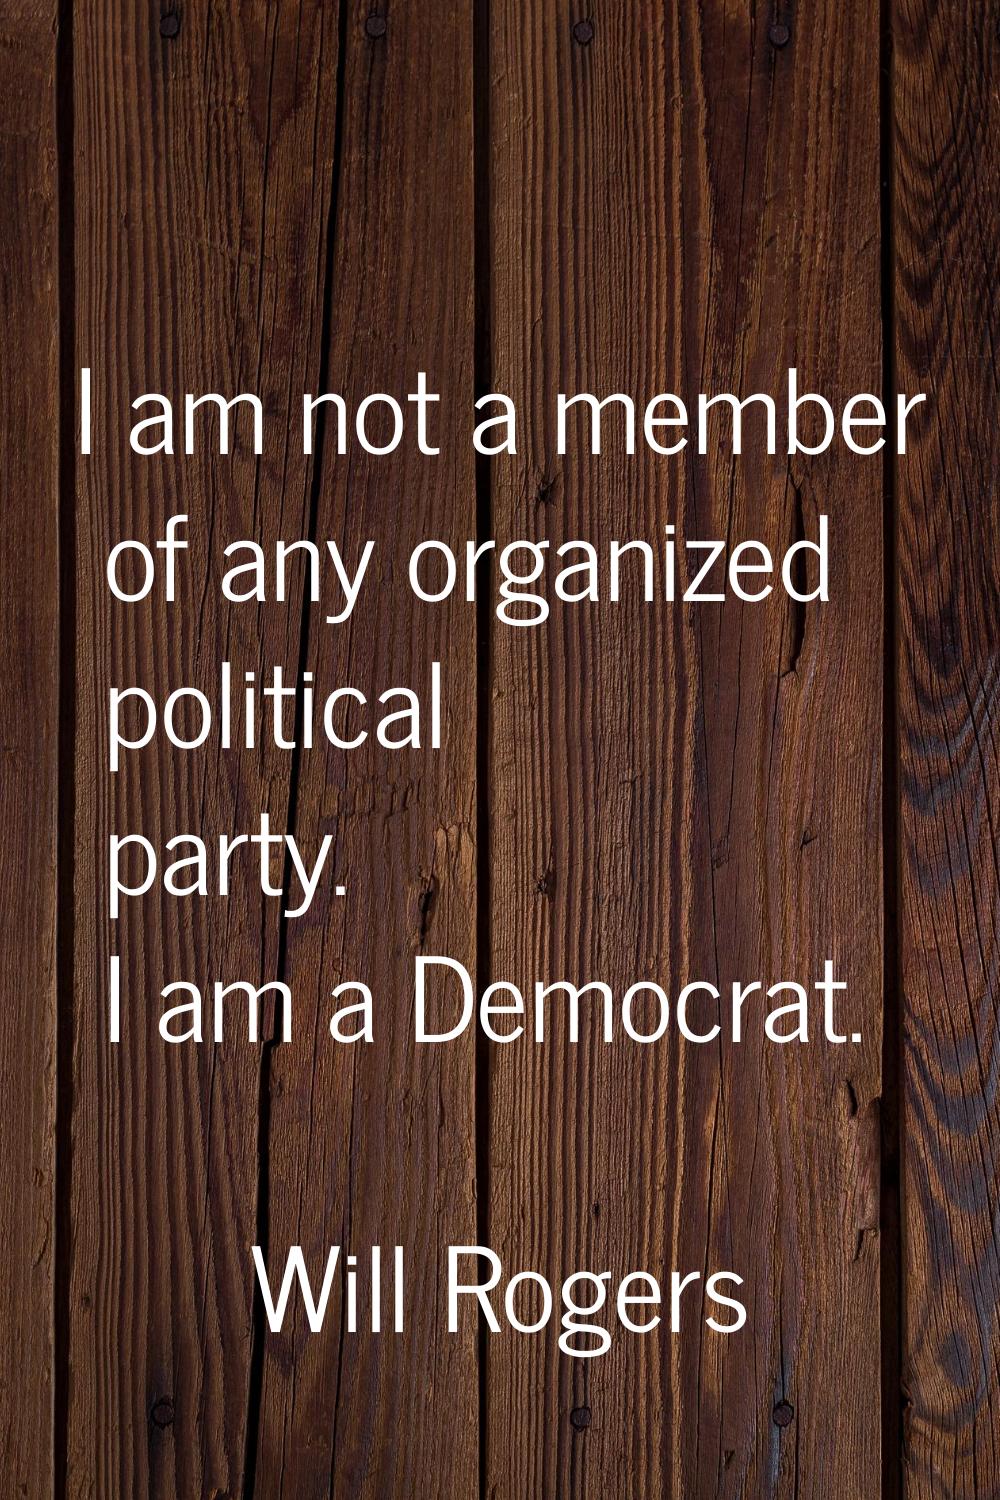 I am not a member of any organized political party. I am a Democrat.